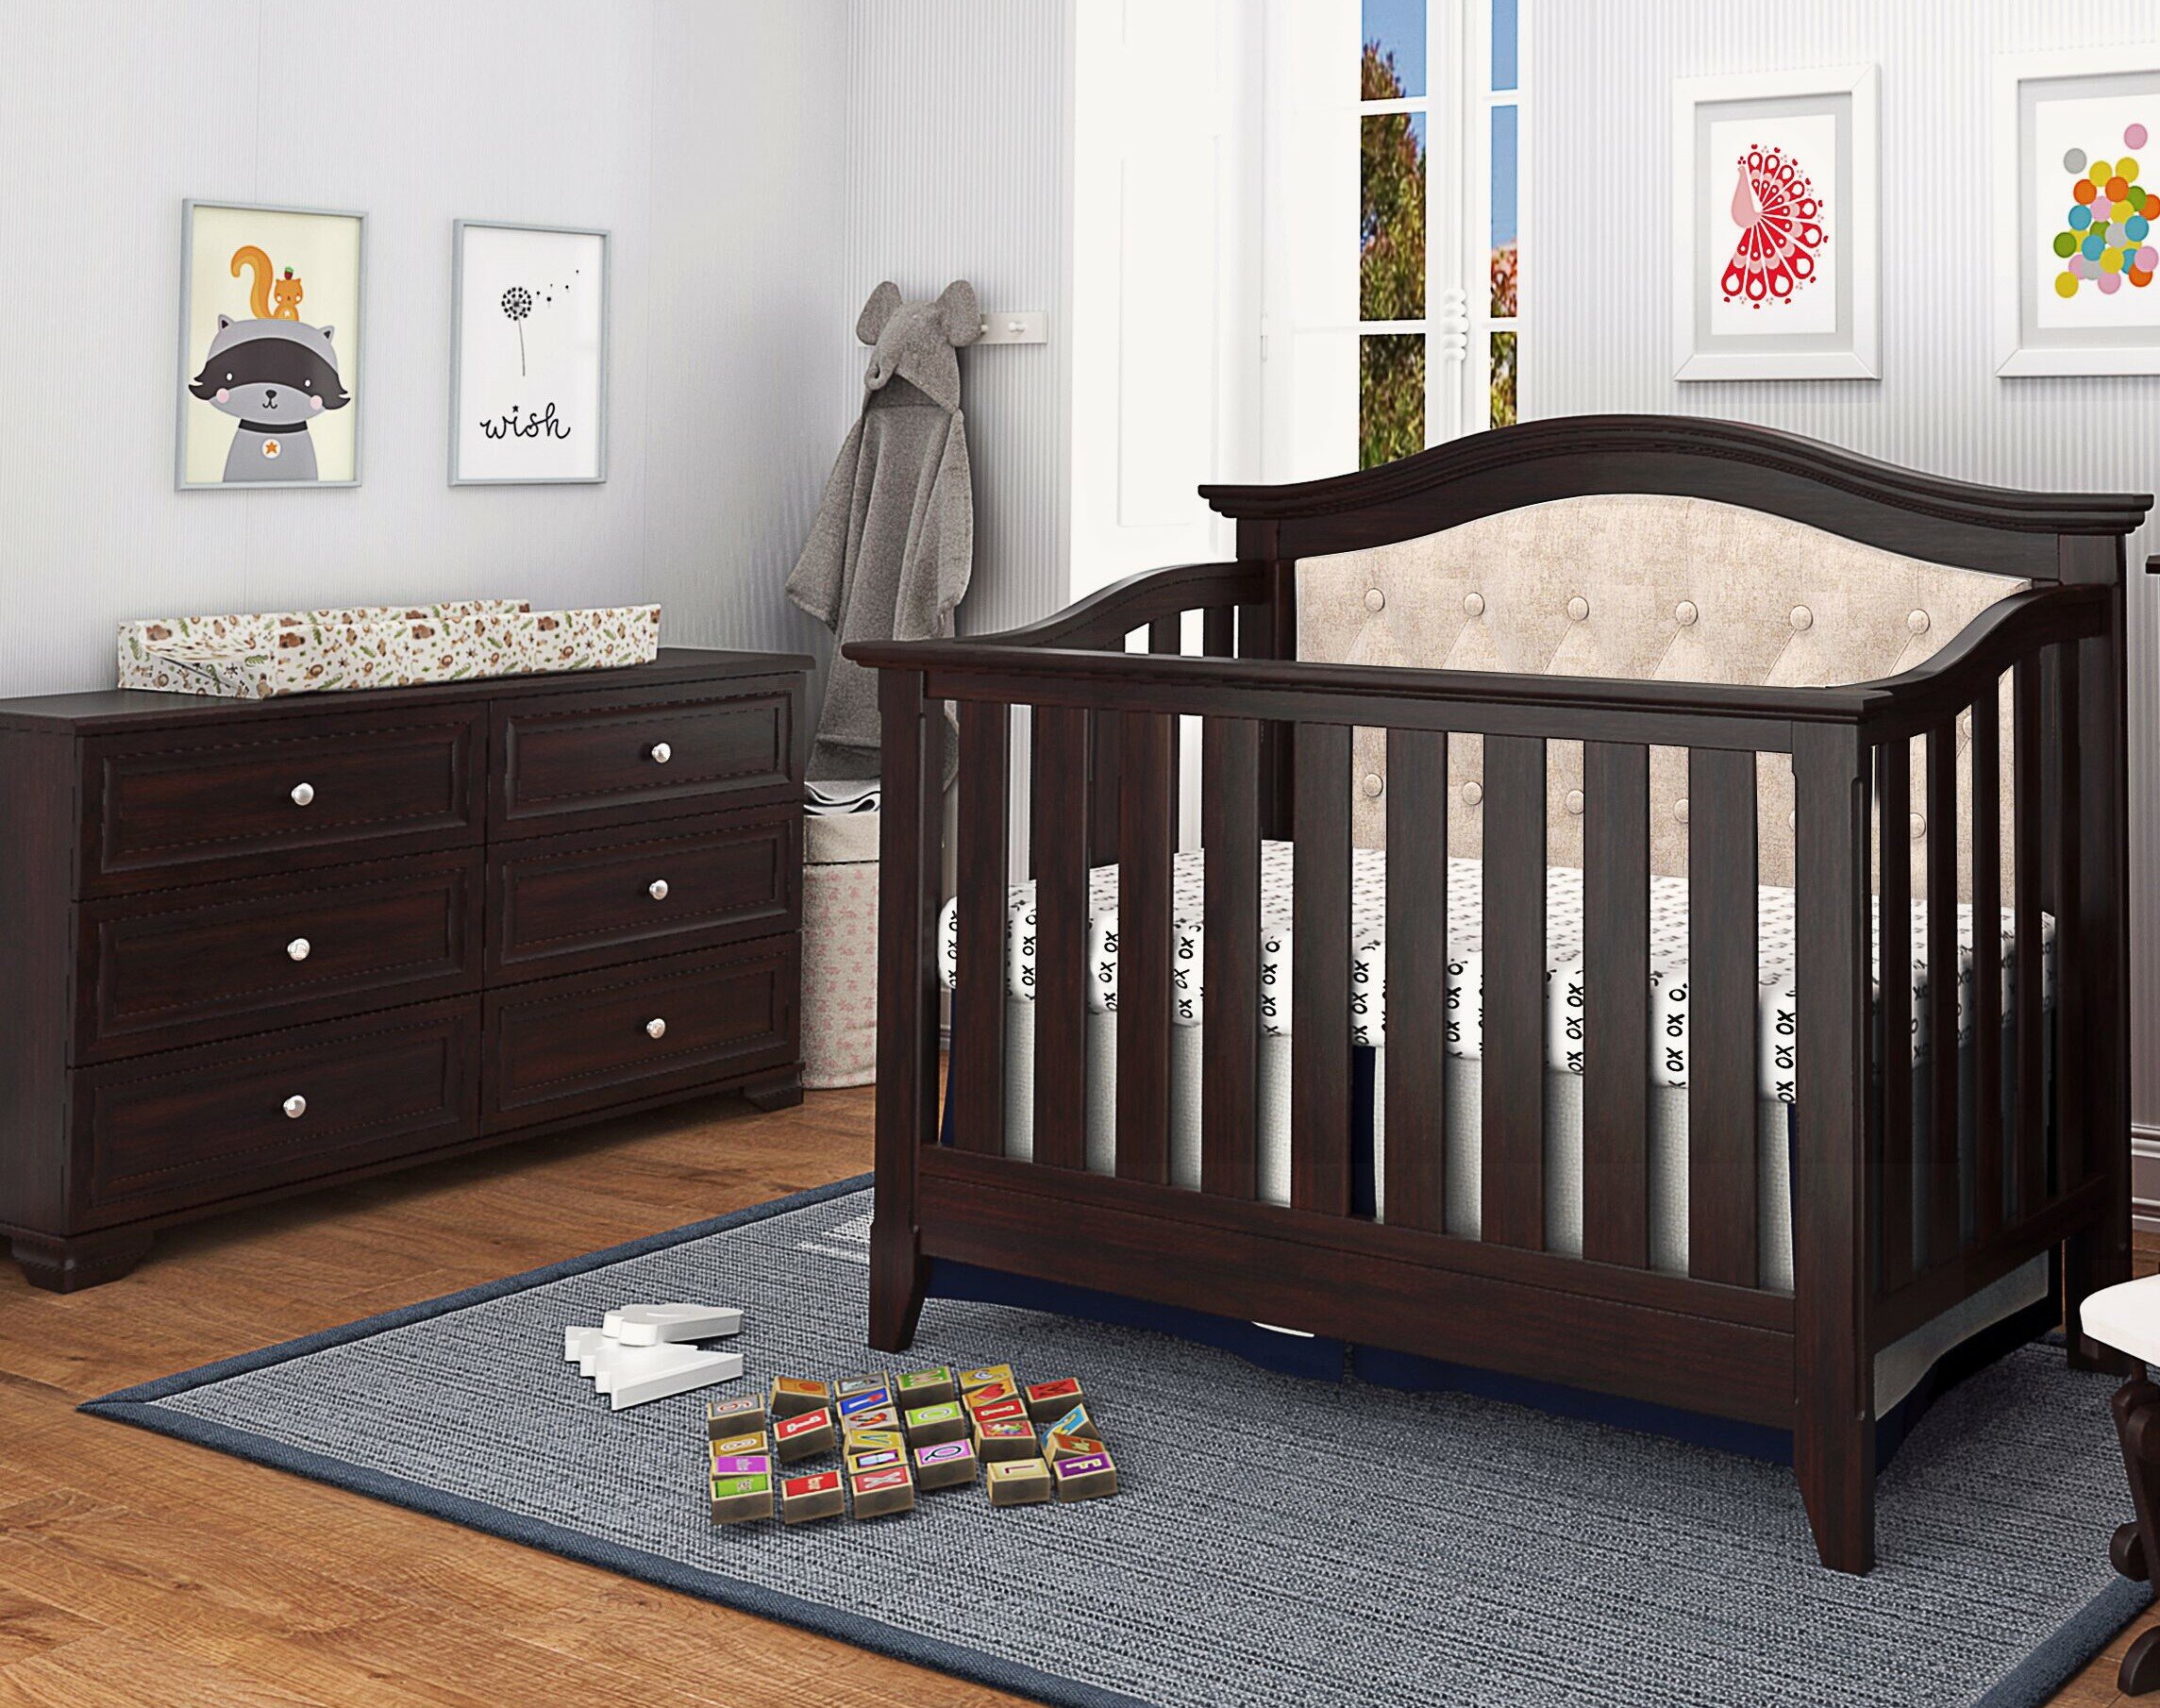 1 year baby bed set